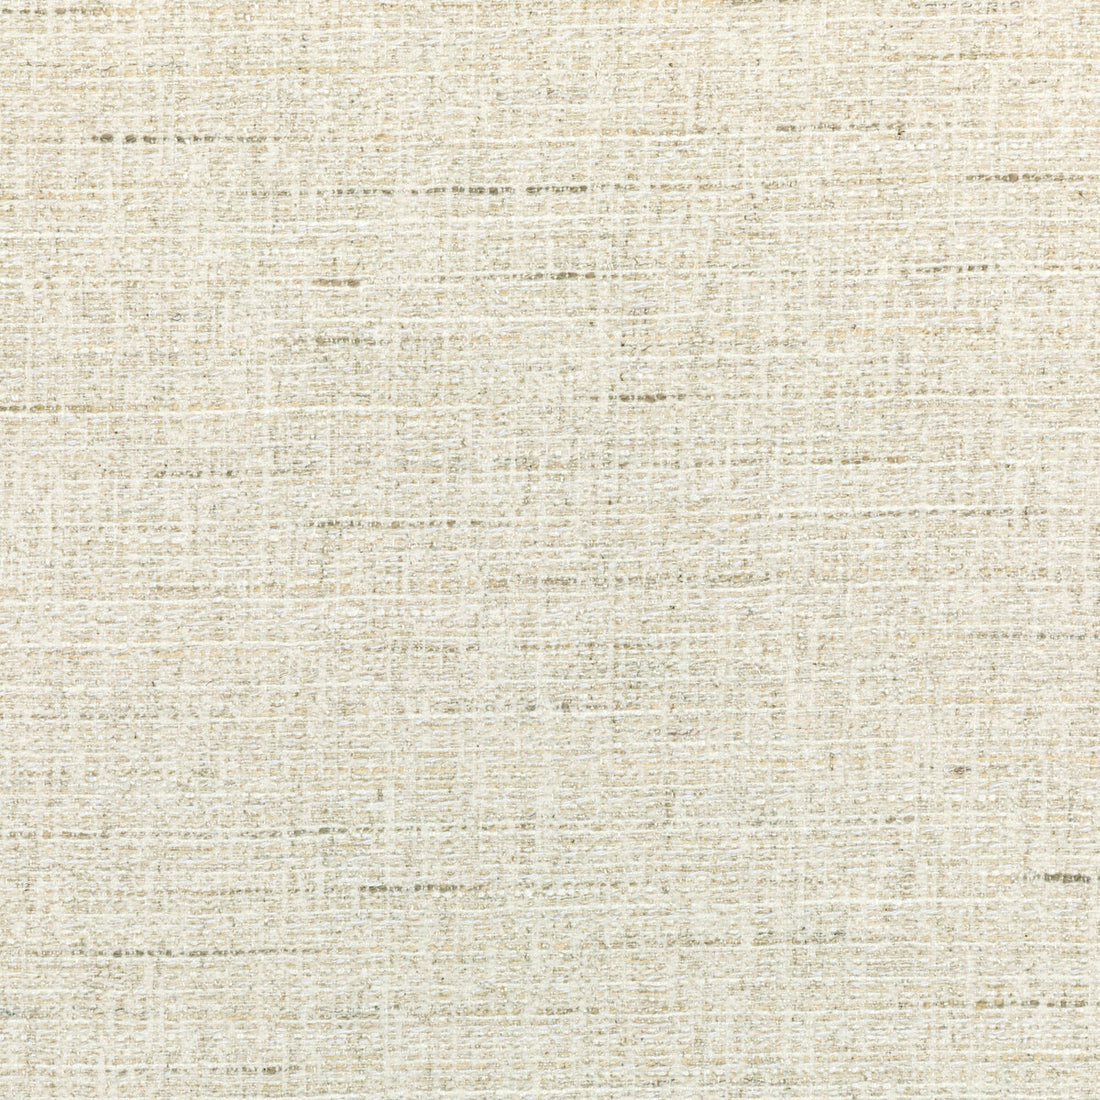 Artistic Craft fabric in white sand color - pattern 36106.16.0 - by Kravet Couture in the Luxury Textures II collection